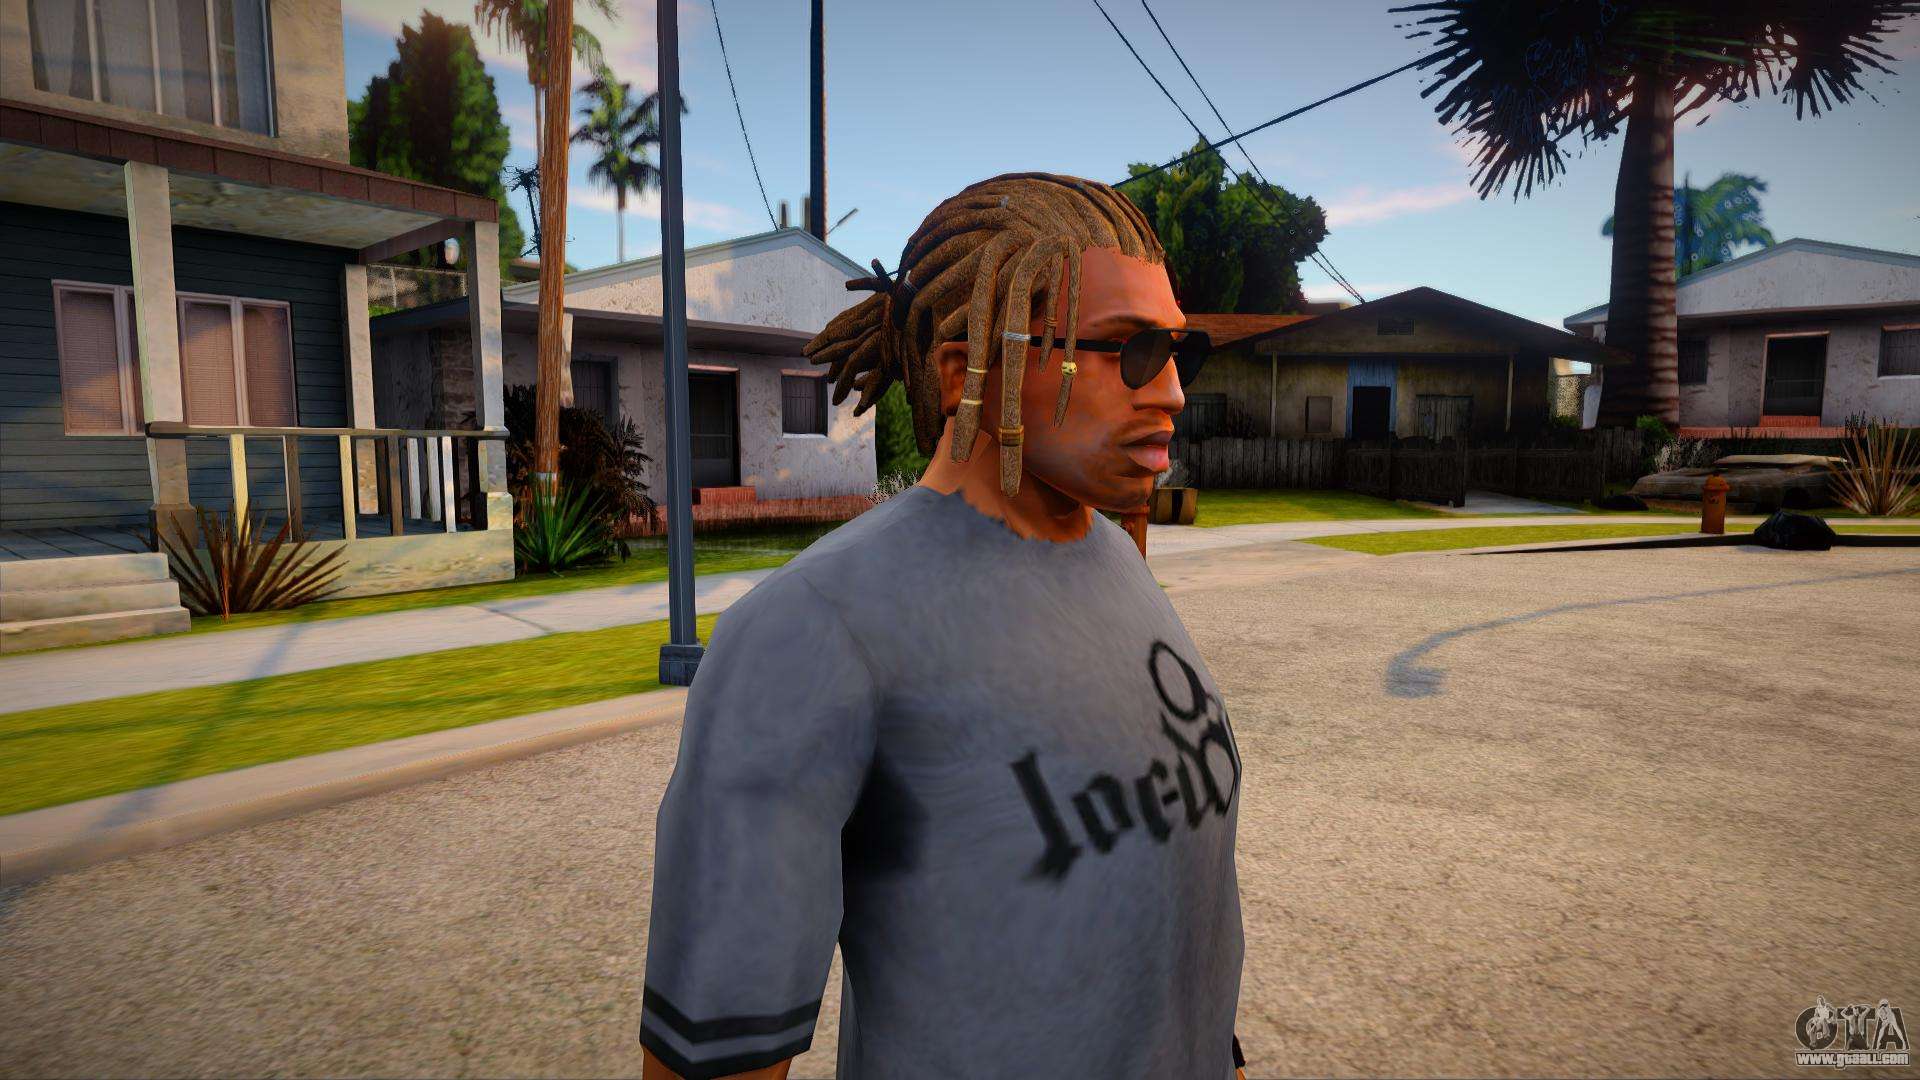 New Hairstyle 2019 For Cj for GTA San Andreas